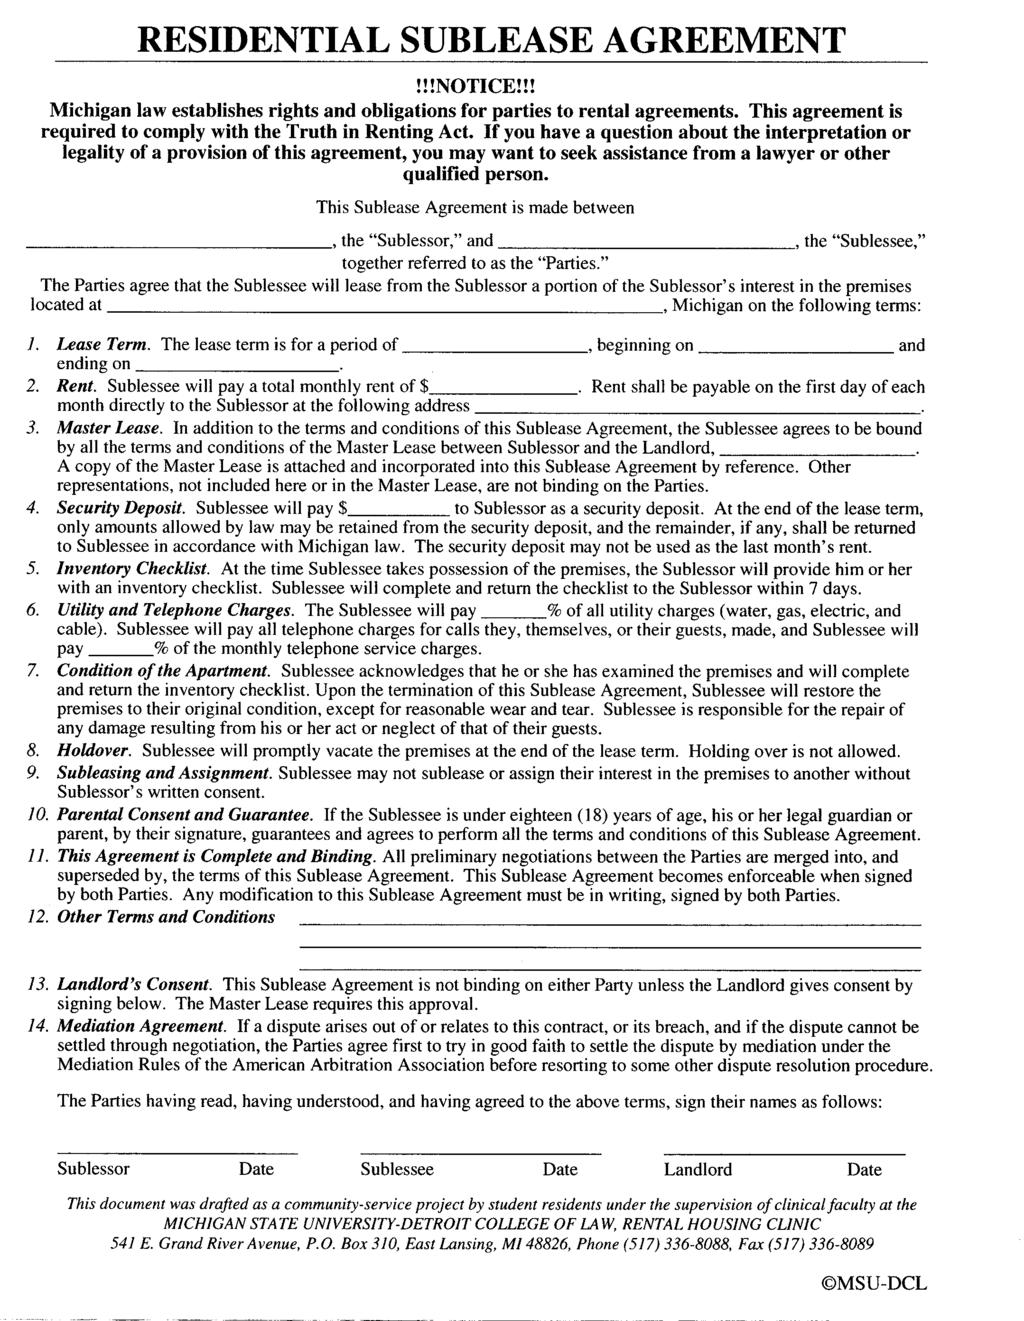 Sample Residential Sublease Agreement!!!NOTICE!!! Michigan law establishes rights and obligations for parties to rental agreements.